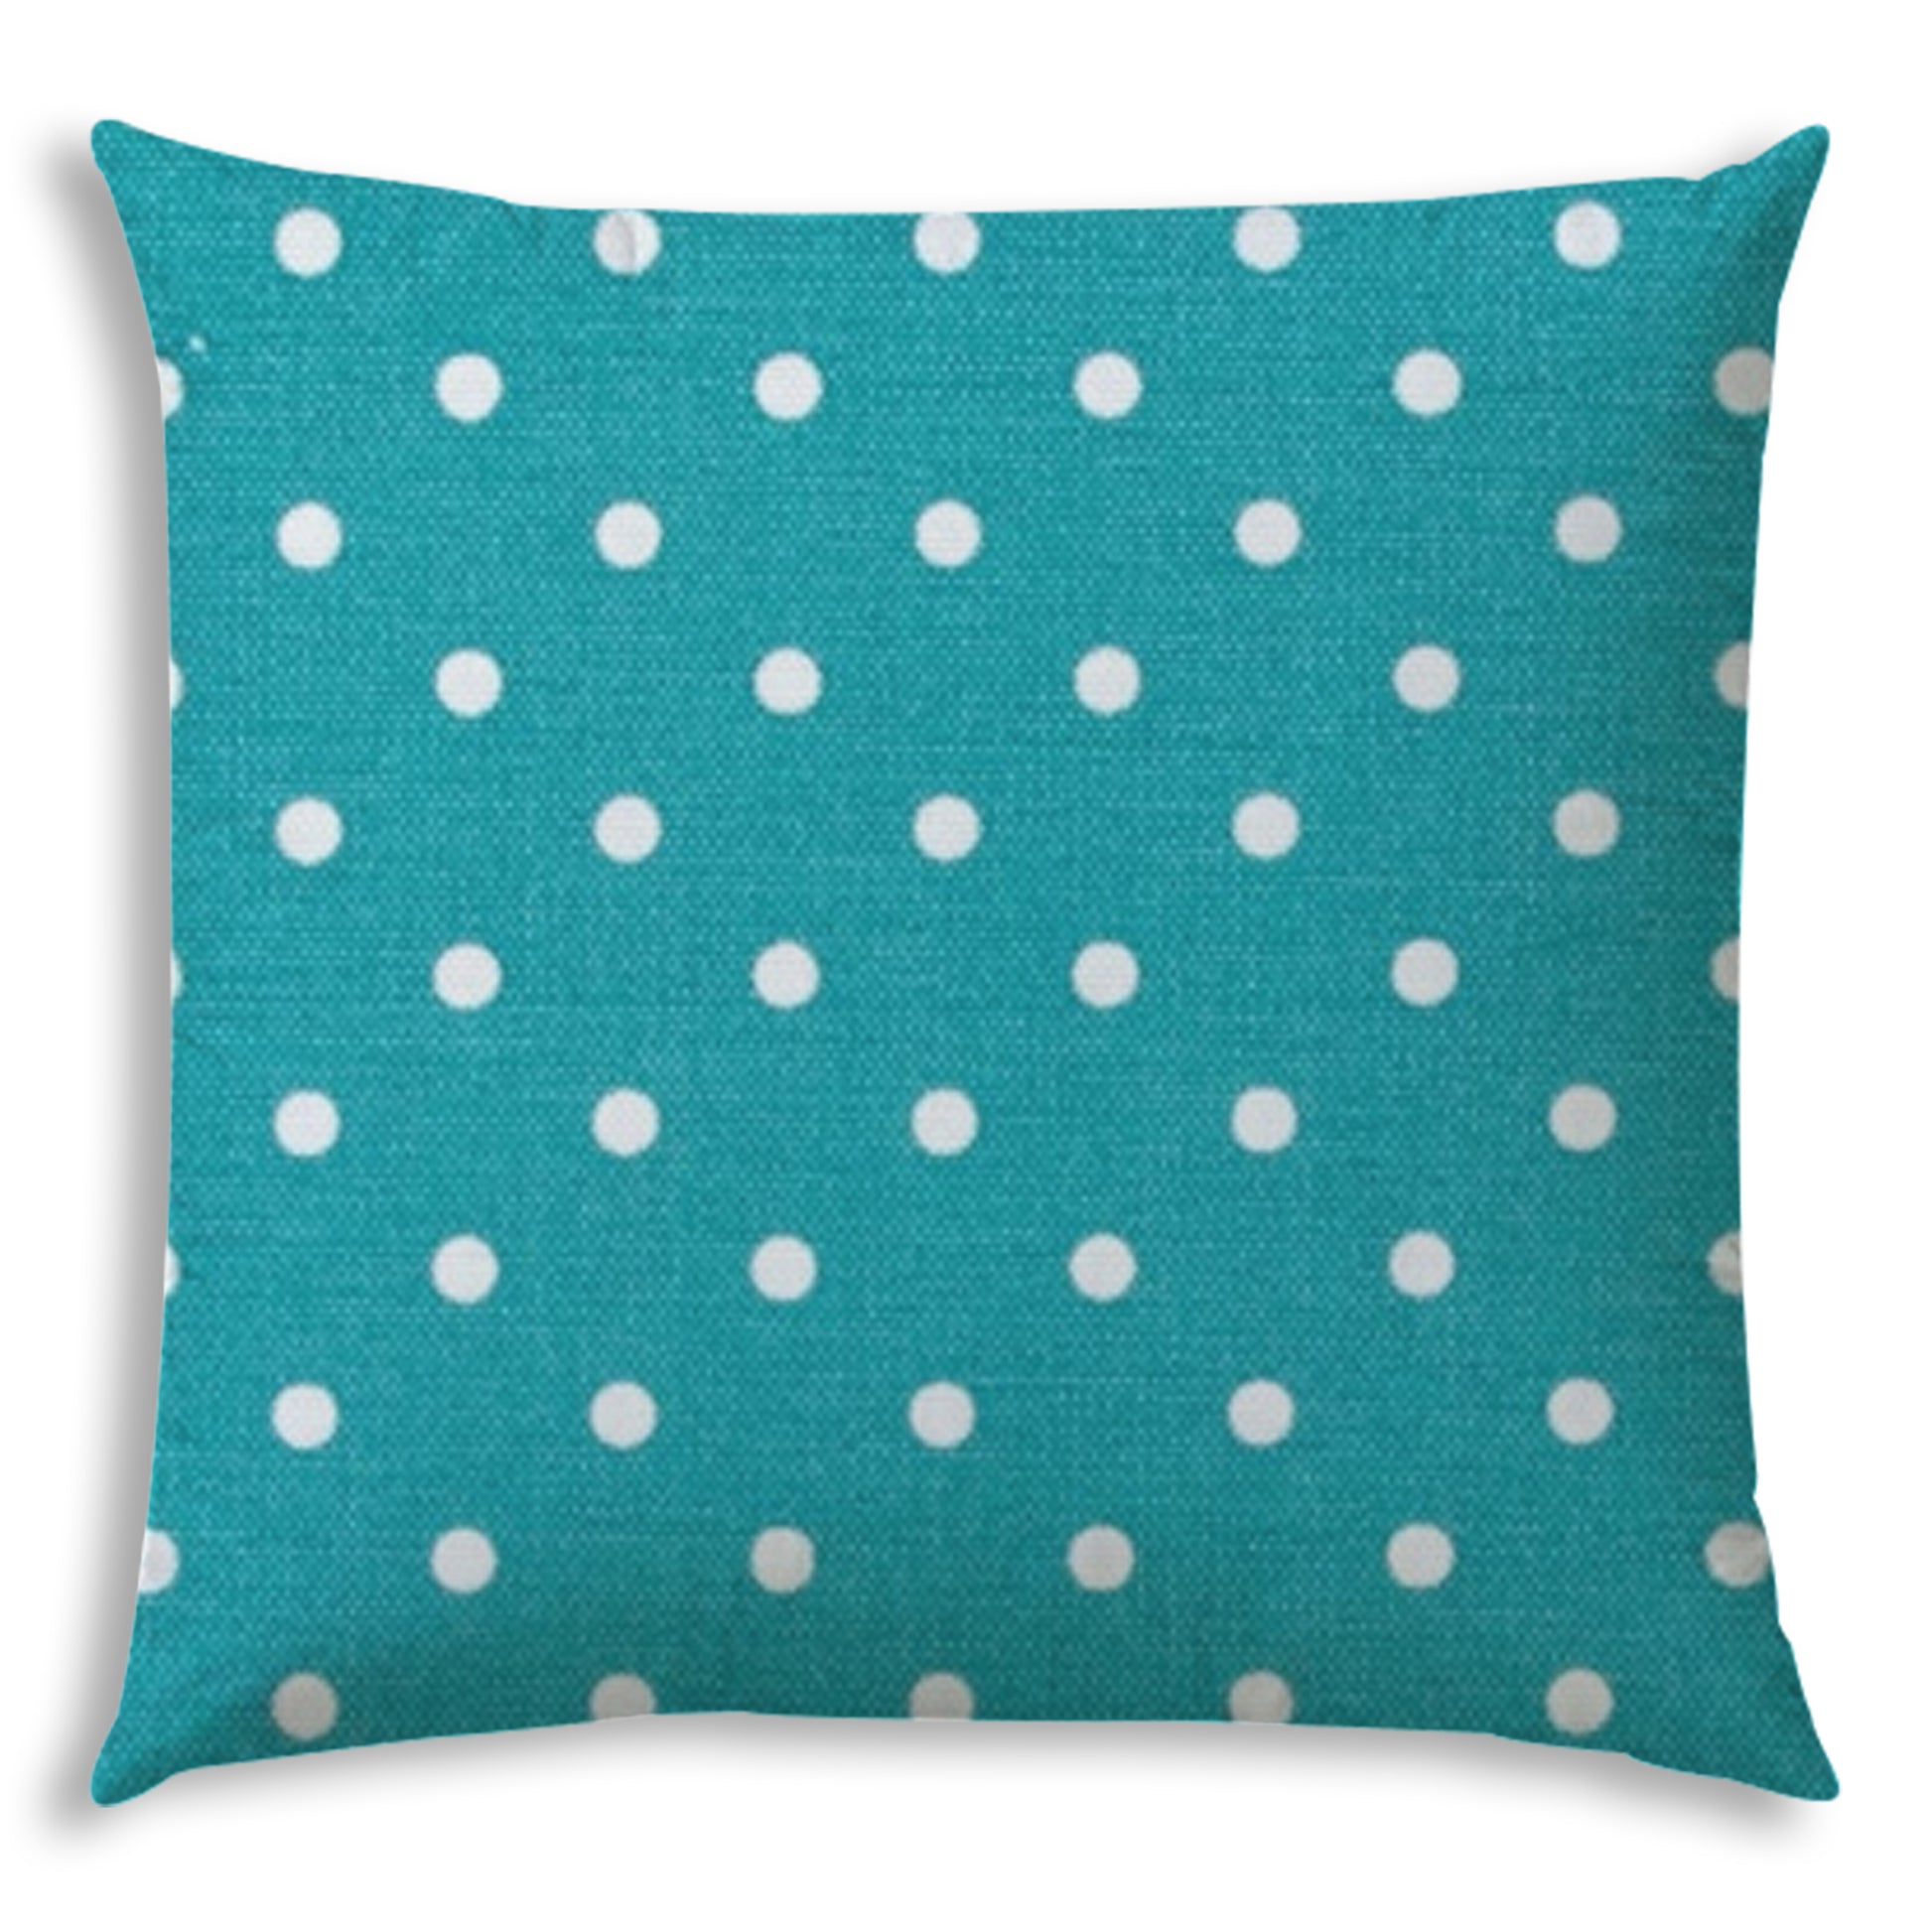 DINER DOT Turquoise Indoor Outdoor Pillow Sewn Closure turquoise-polyester